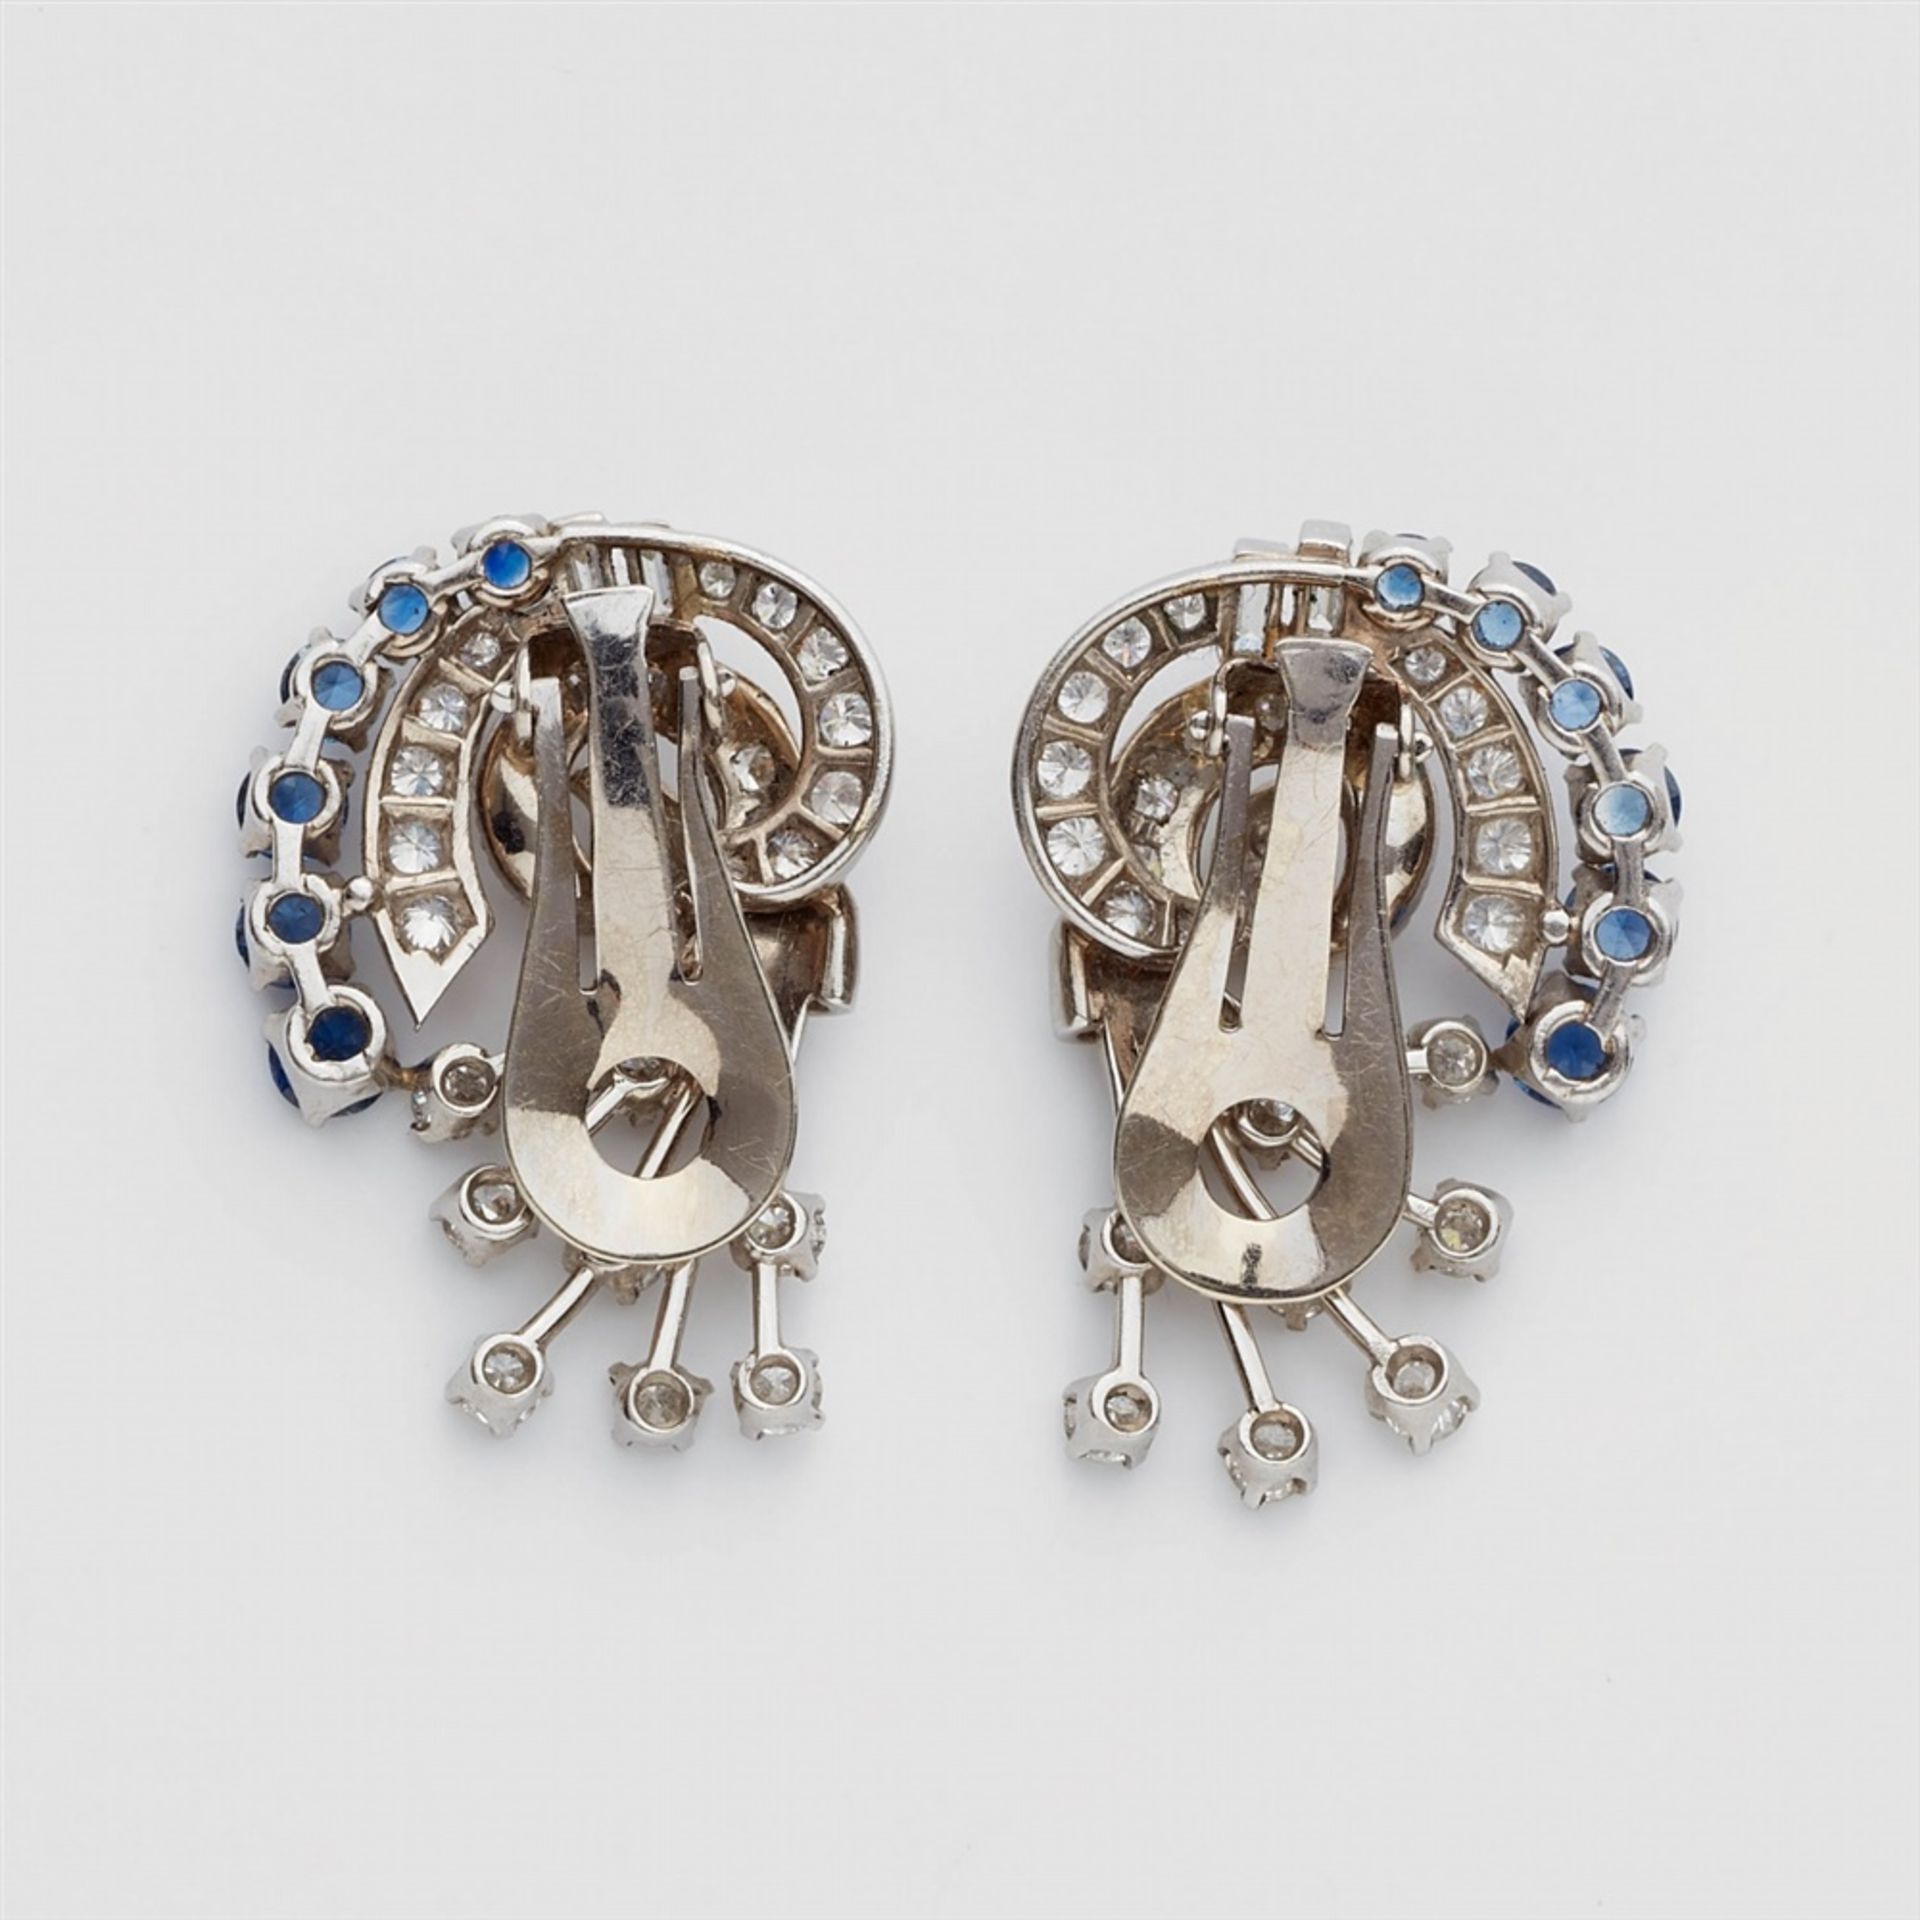 A pair of sapphire clip earringsPlatinum earrings with 14k white gold clip findings. Designed as - Bild 2 aus 2